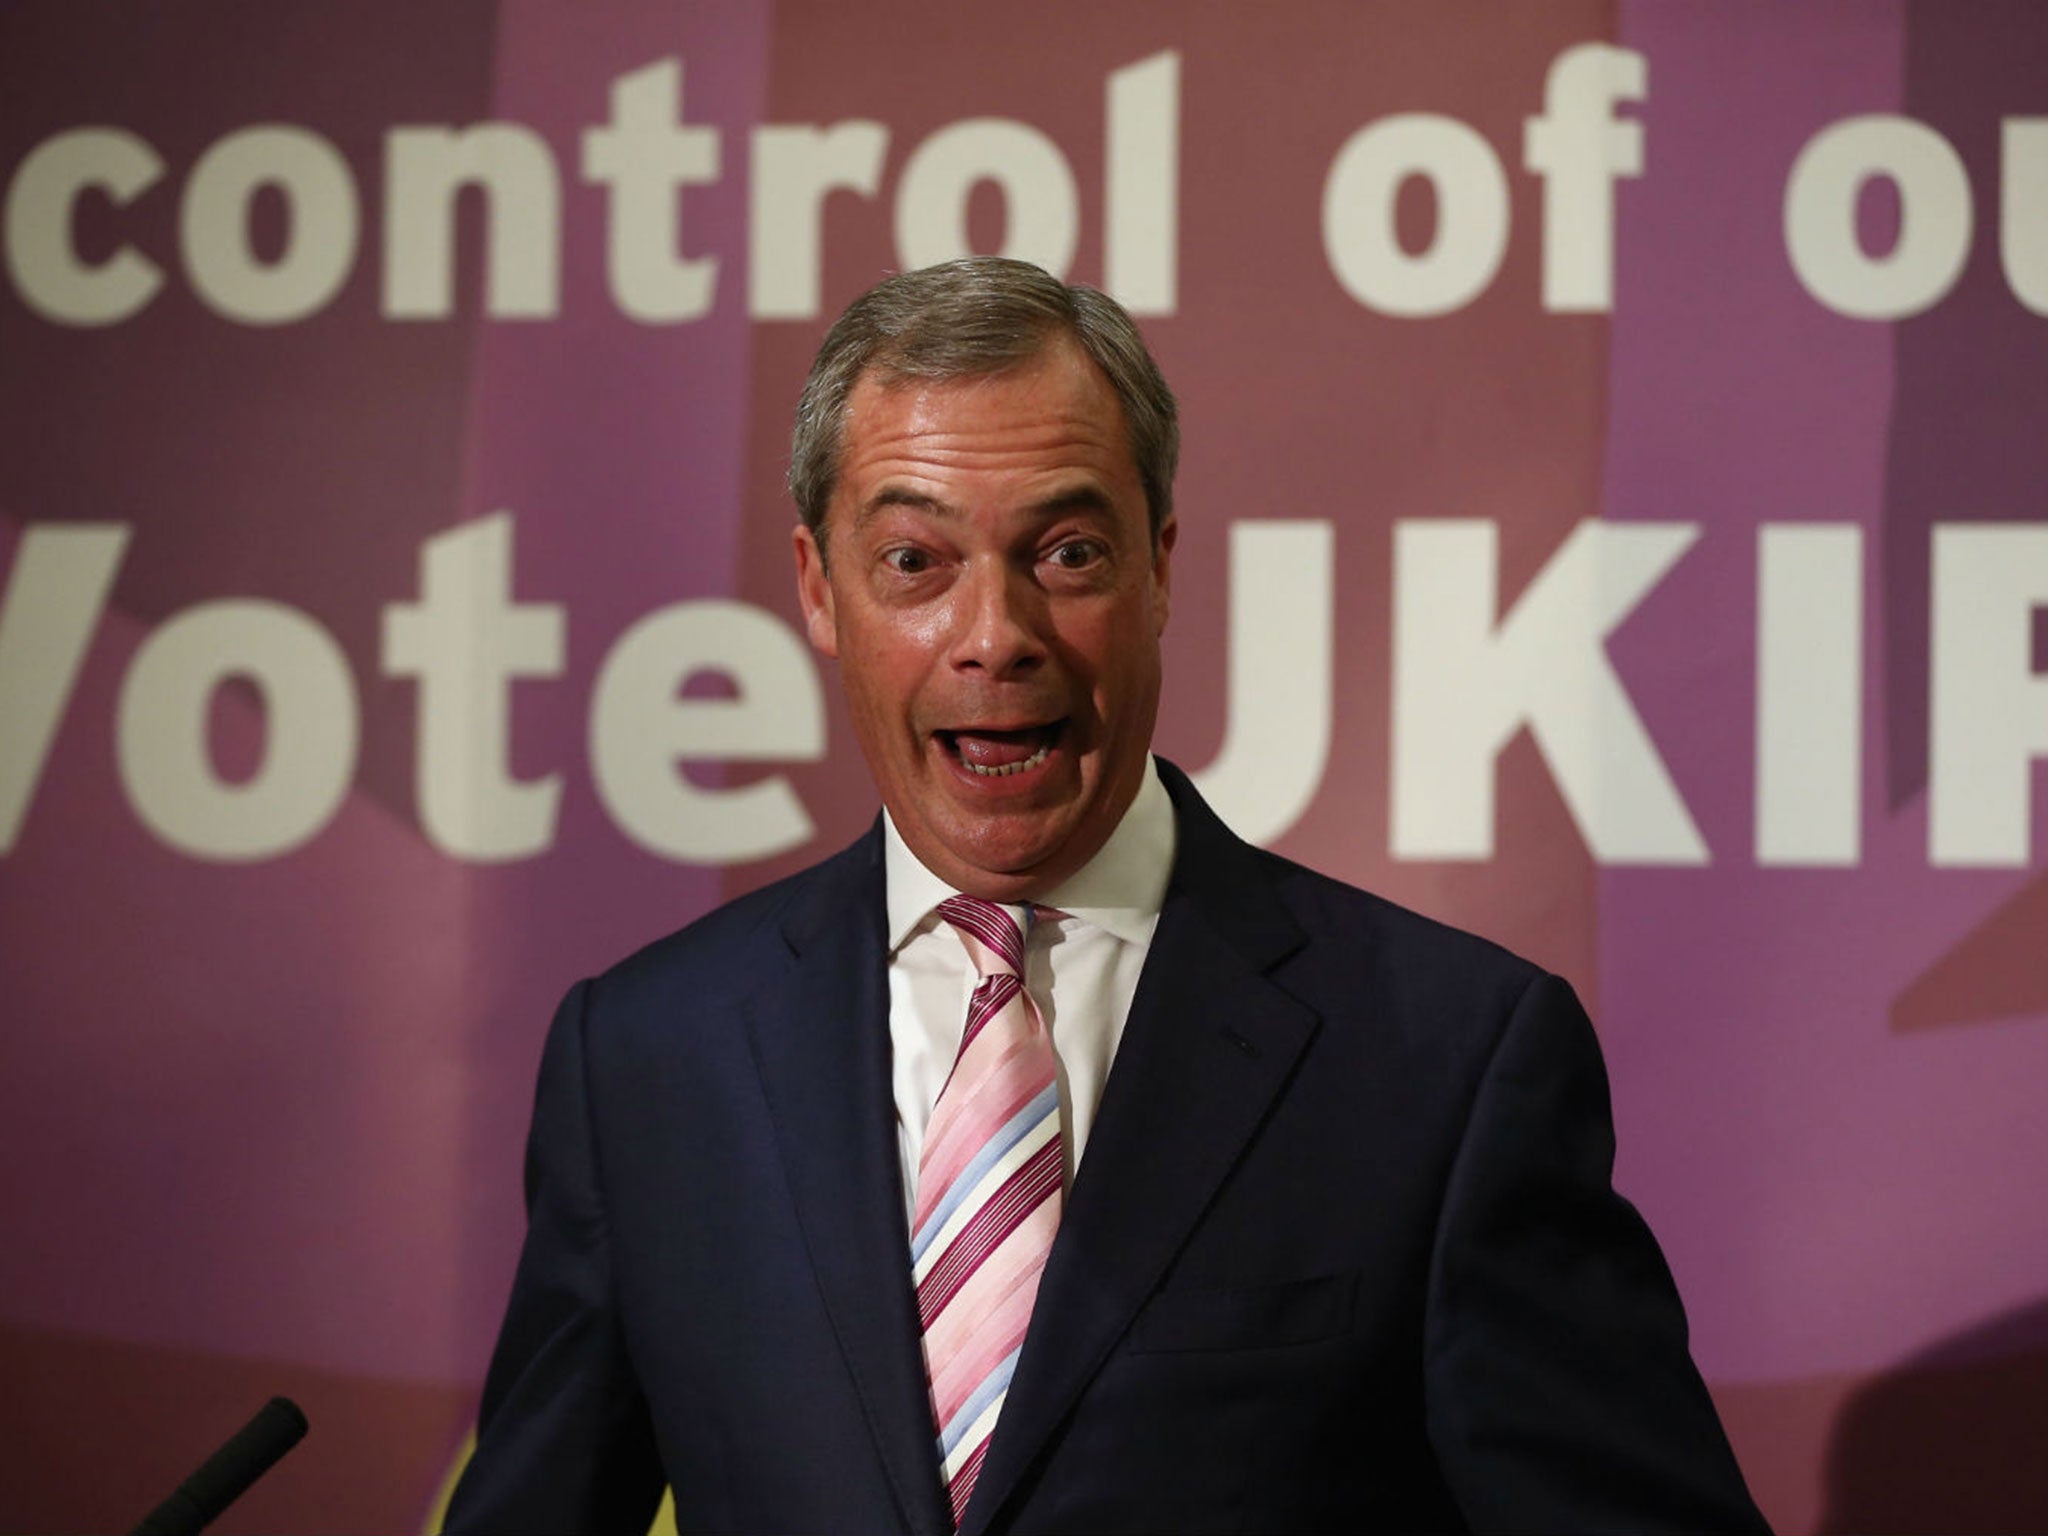 Nigel Farage said it was a 'hammer blow' for the Conservatives